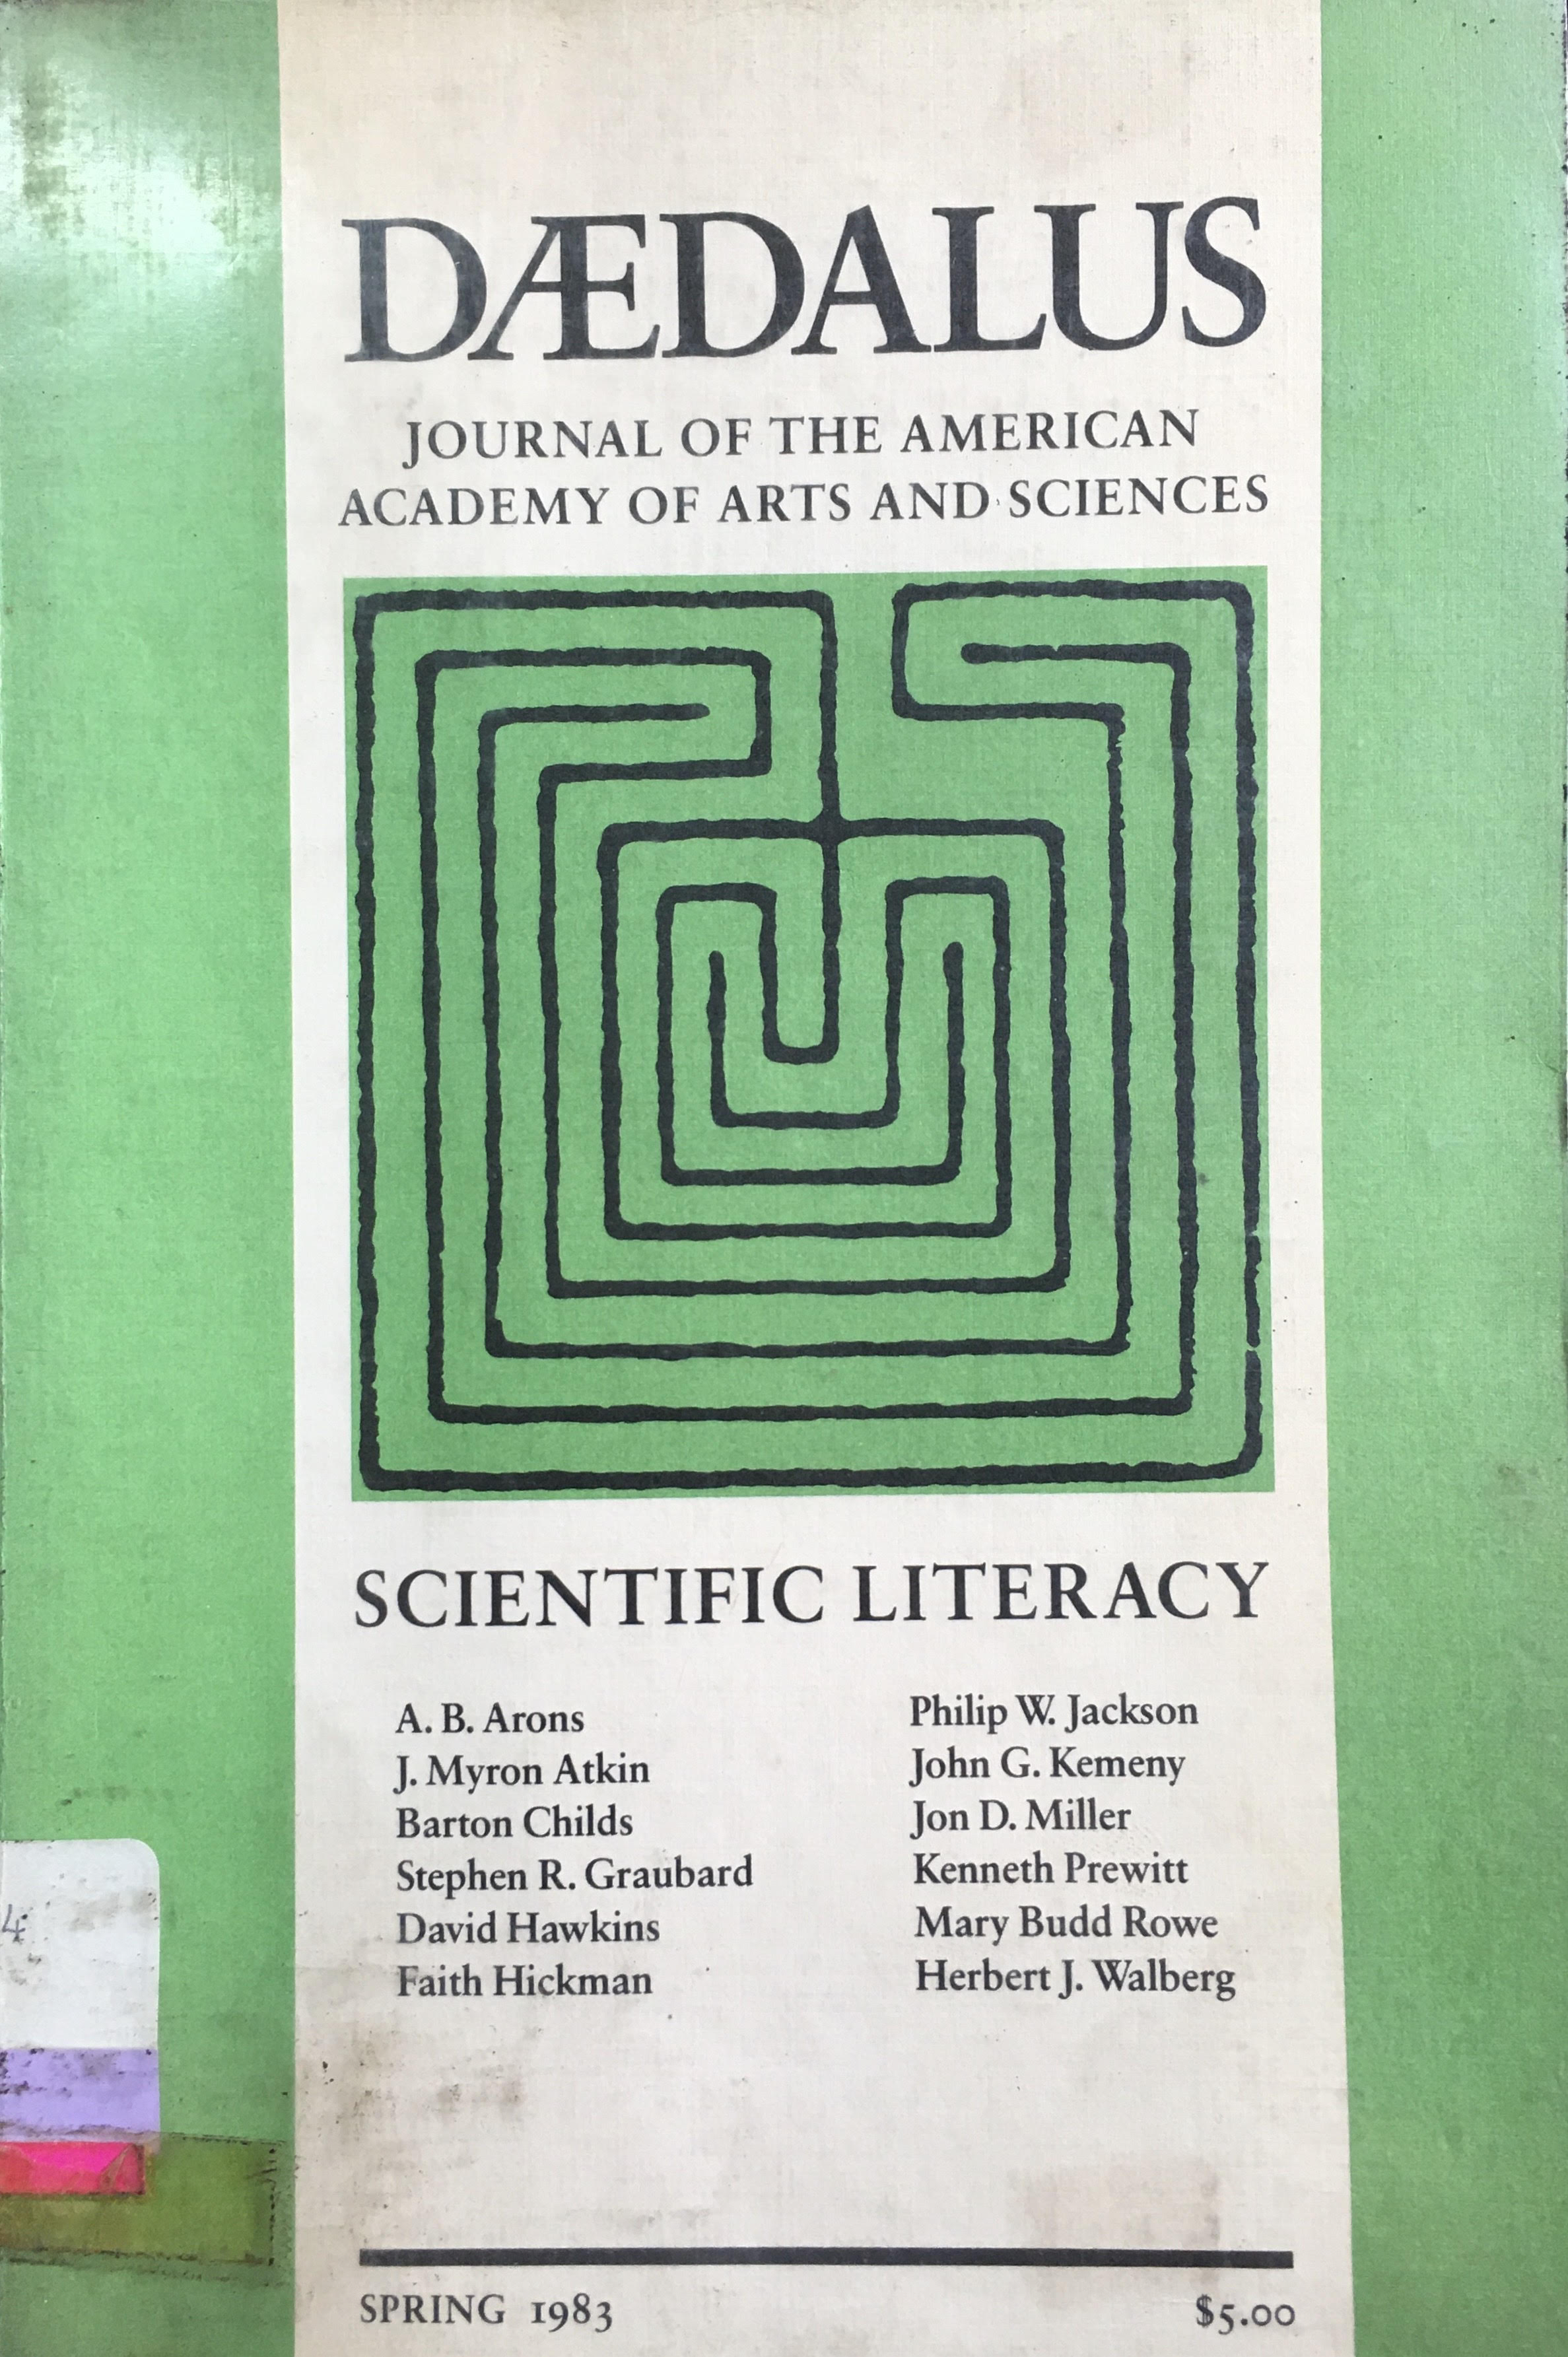 Daedalus Journal of the American academy of arts and sciences :  Scientific Literacy